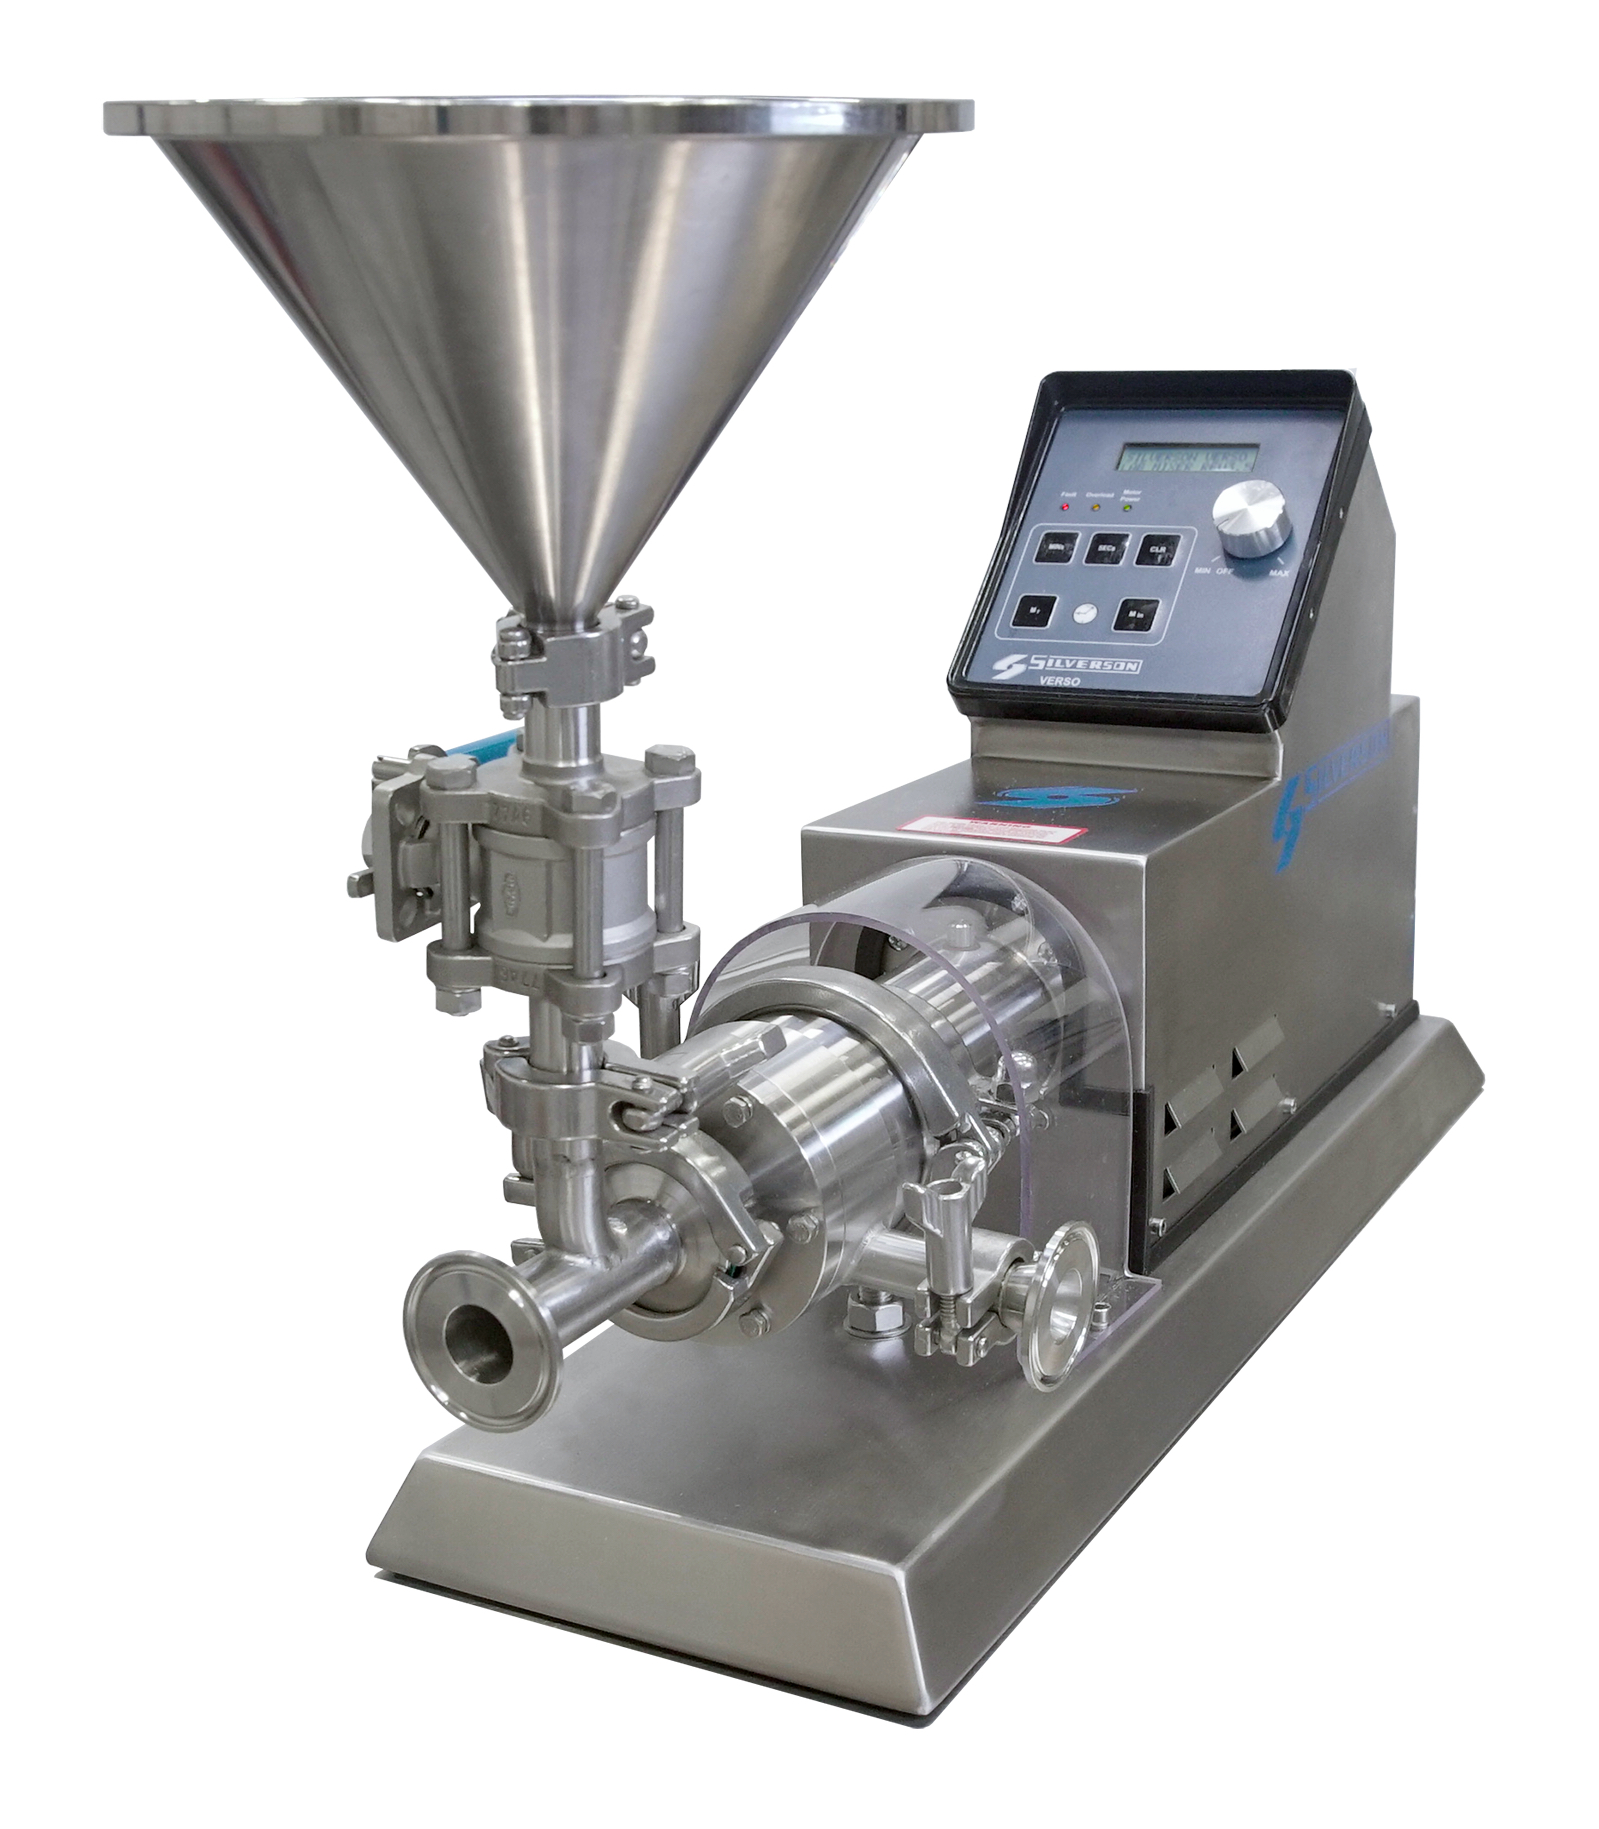 New Powder/liquid mixing solutions from Silverson Machines